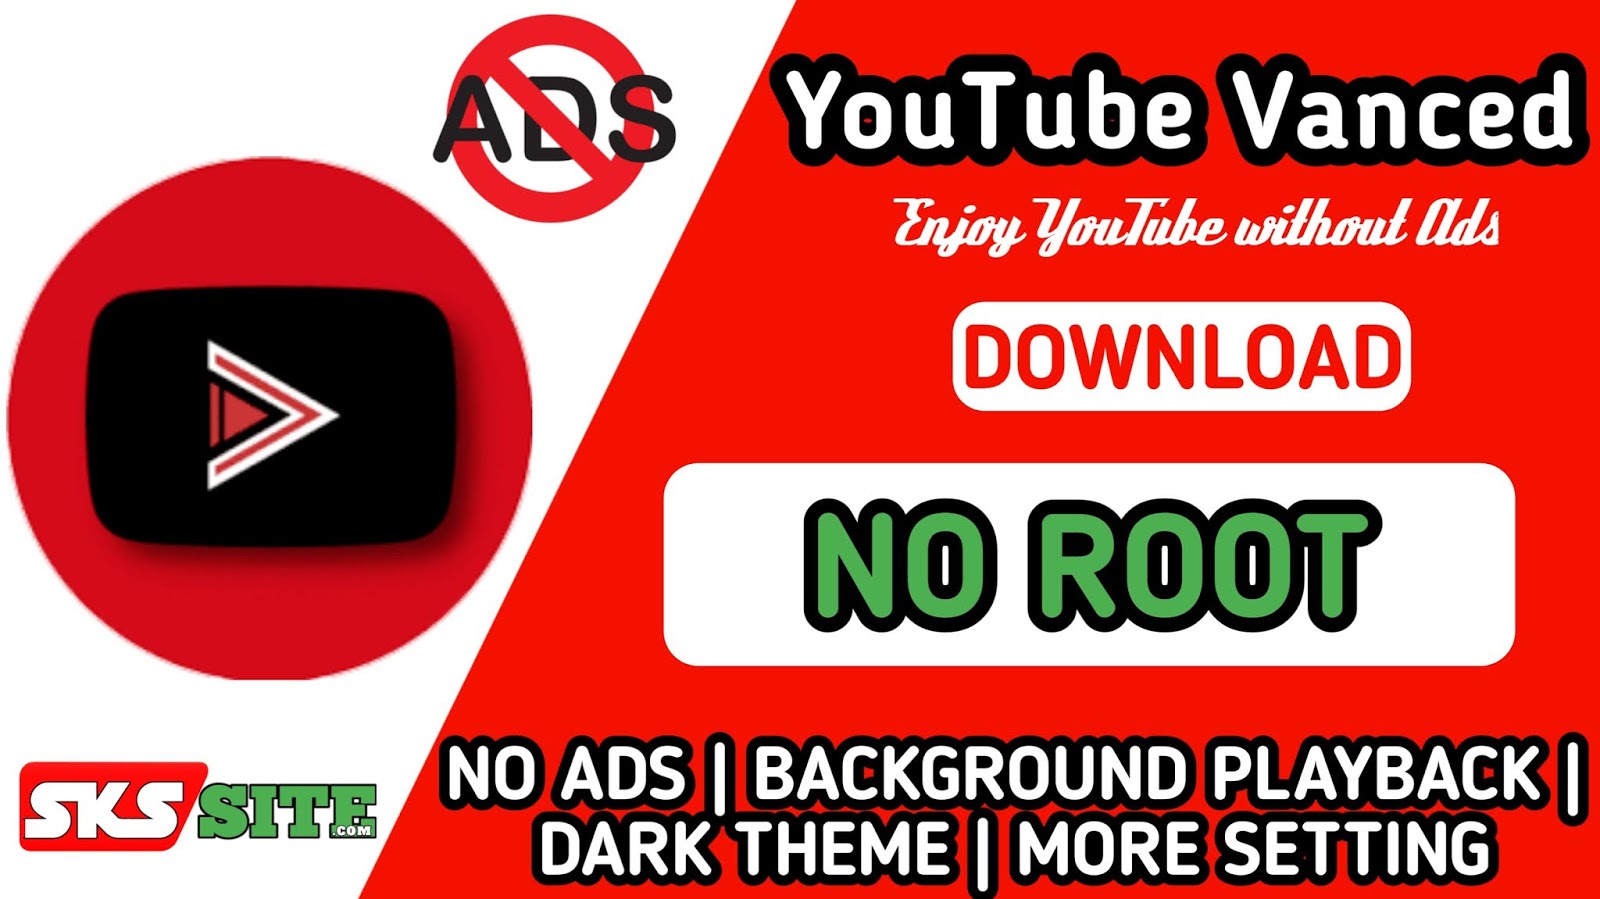 Youtube Vanced V15 38 35 Full Ad Free Amp Background Play Support No Root